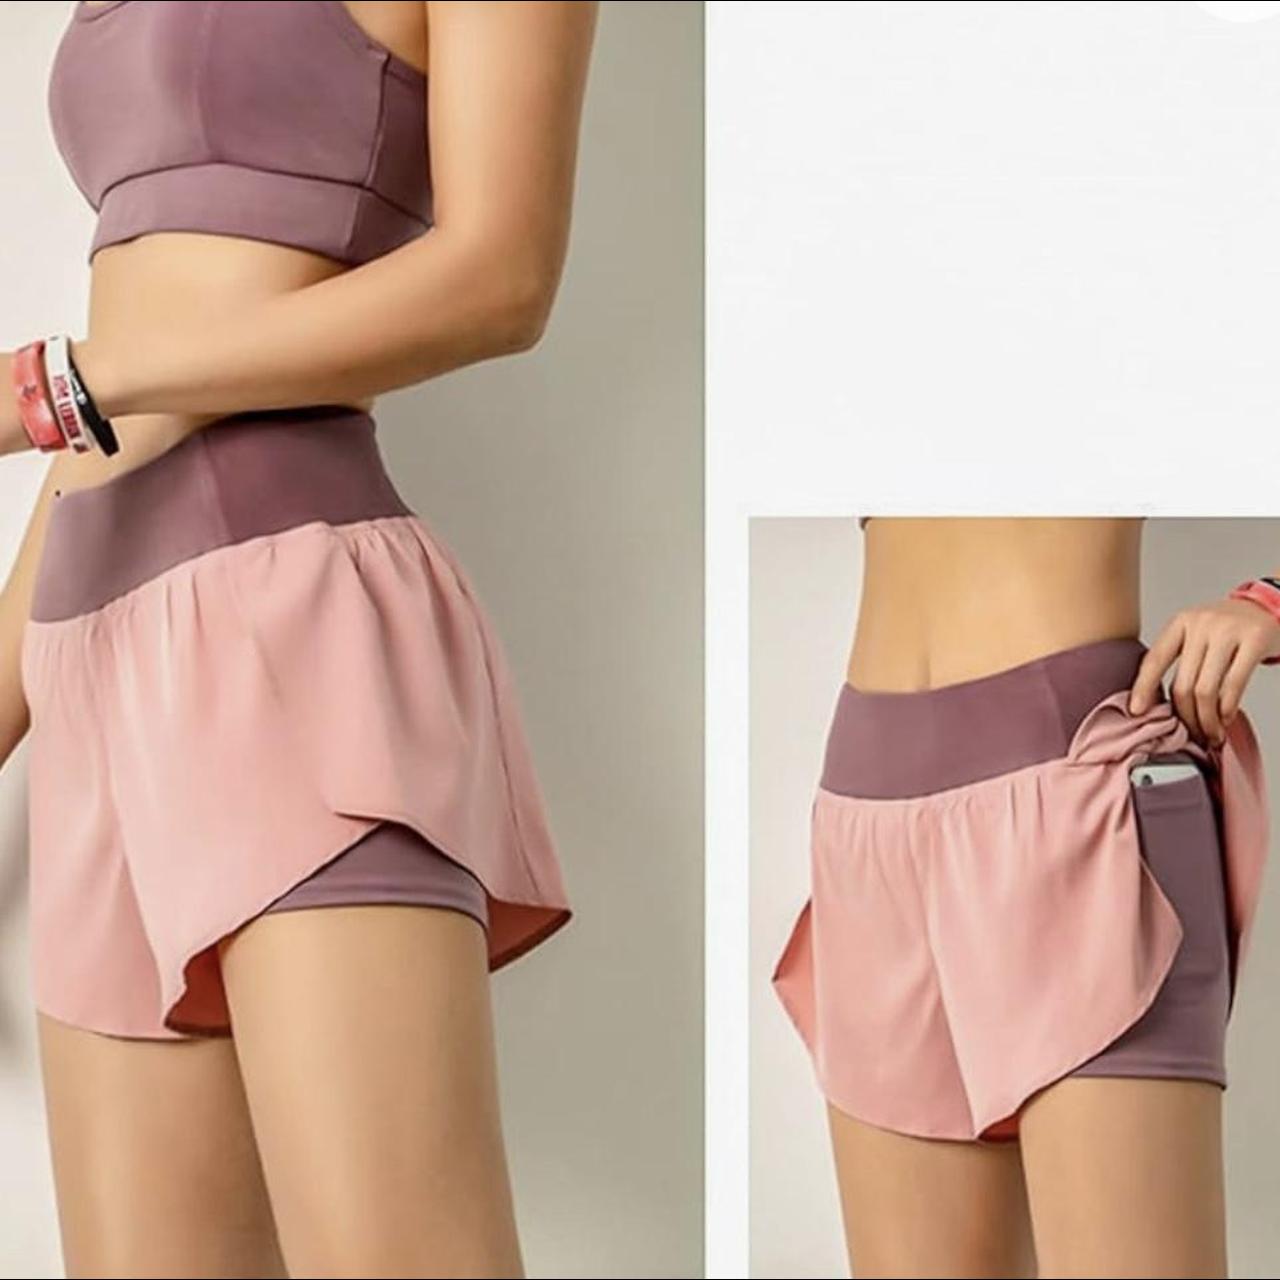 Double-layer Running Shorts